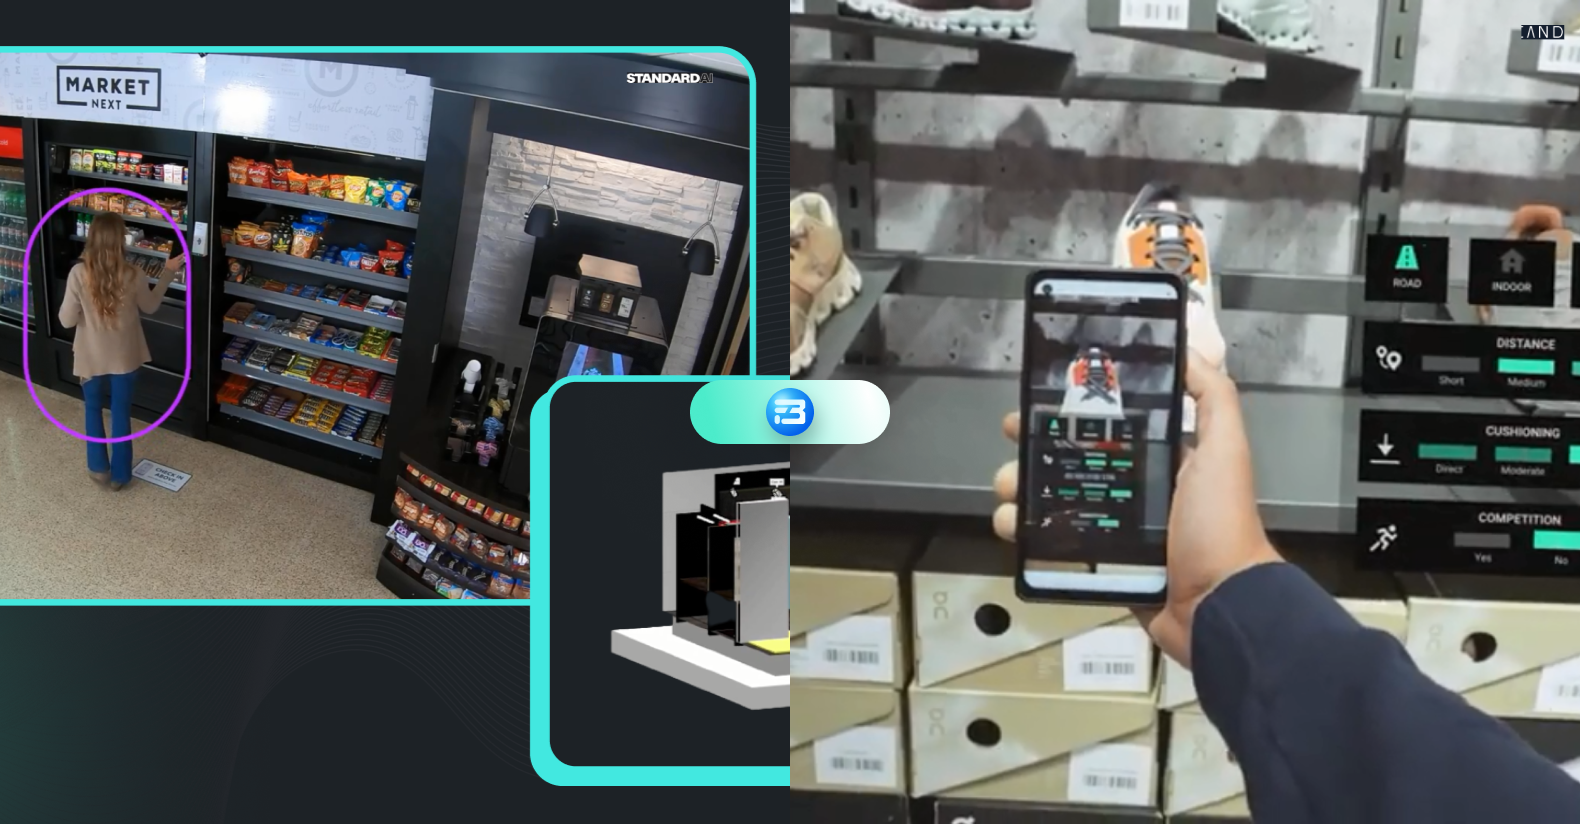 Tracking customers with 3d sensor tracking image recognition and a user getting results for the sports product using AR image recognition in retail stores and 